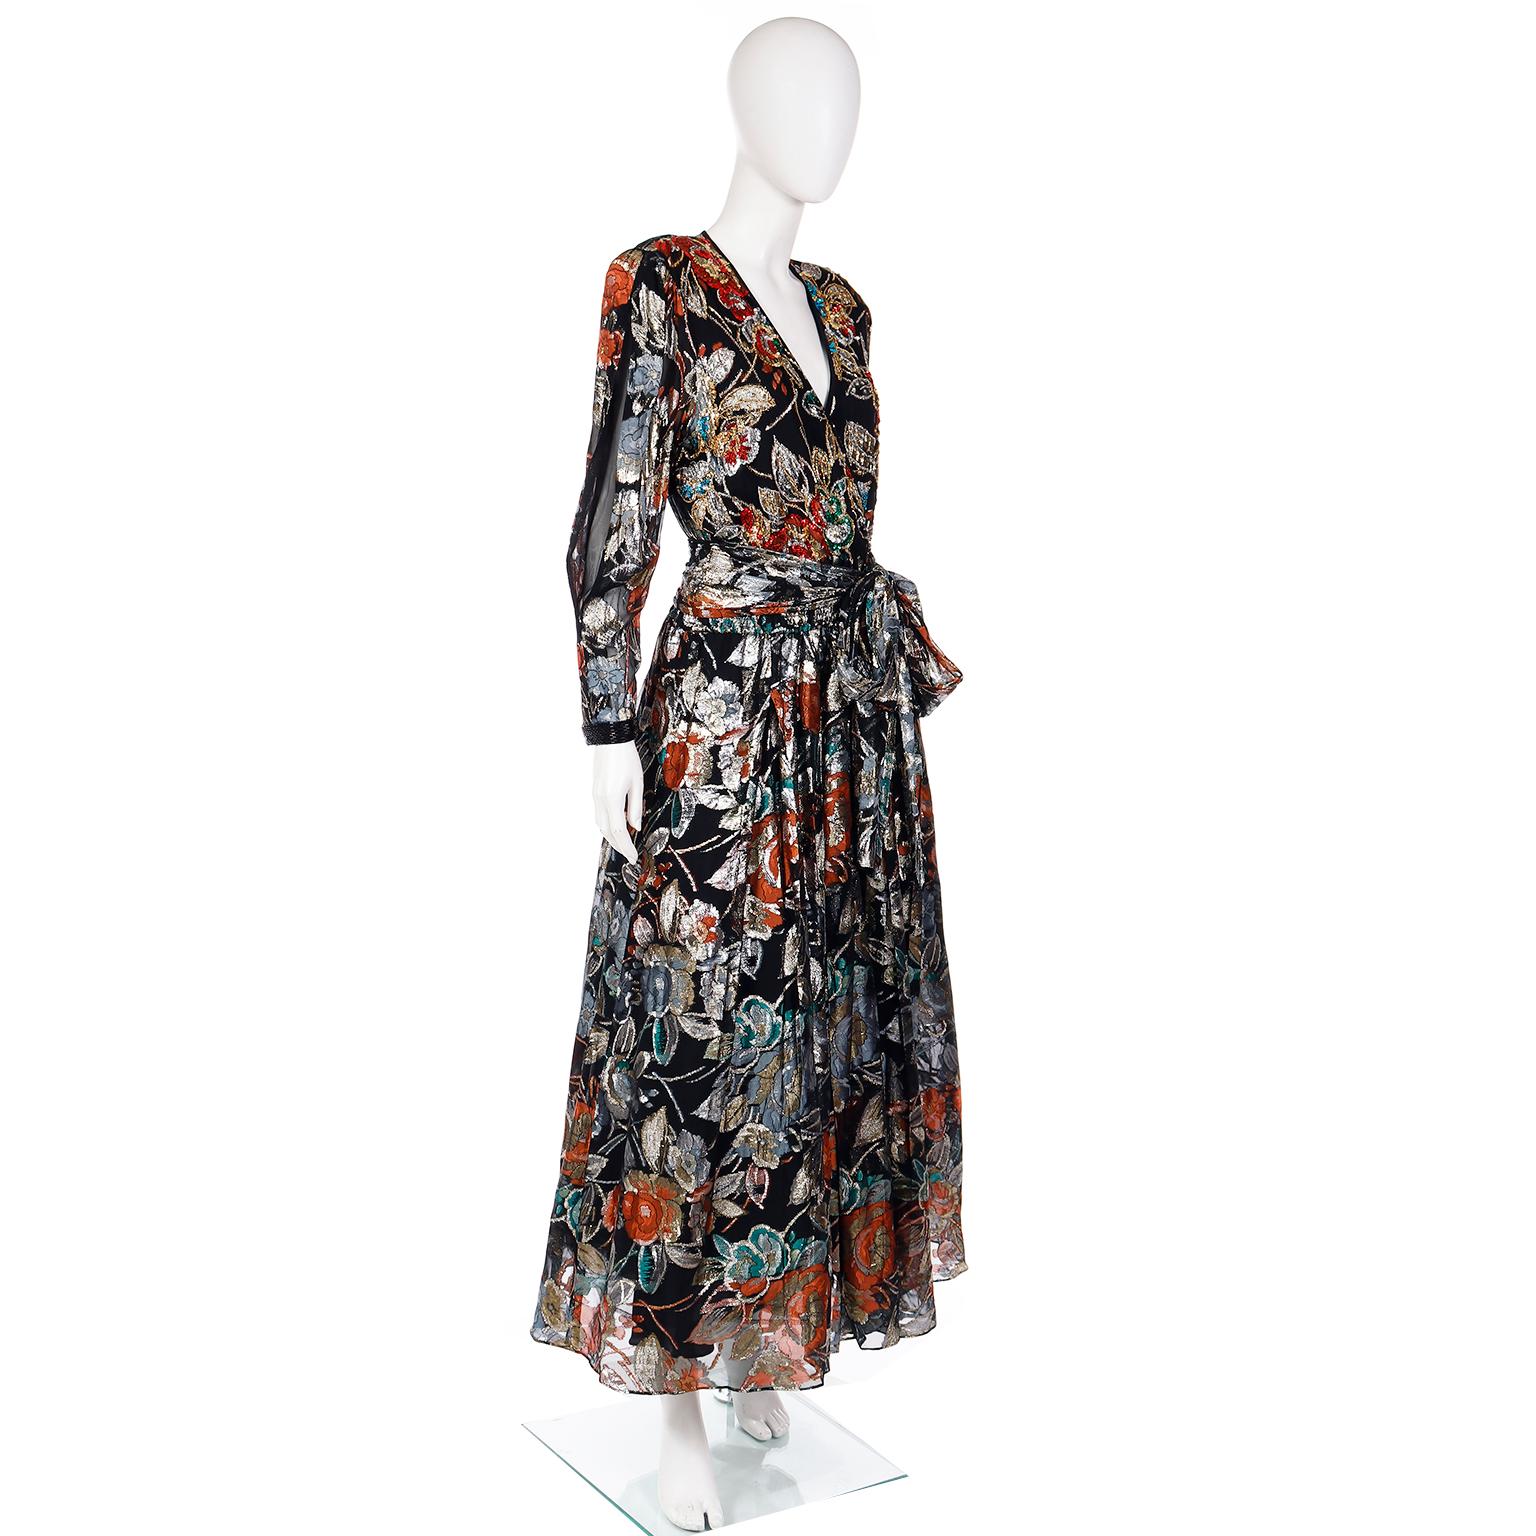 Diane Freis Vintage Metallic Floral Evening Dress With Beads & Sequins 1